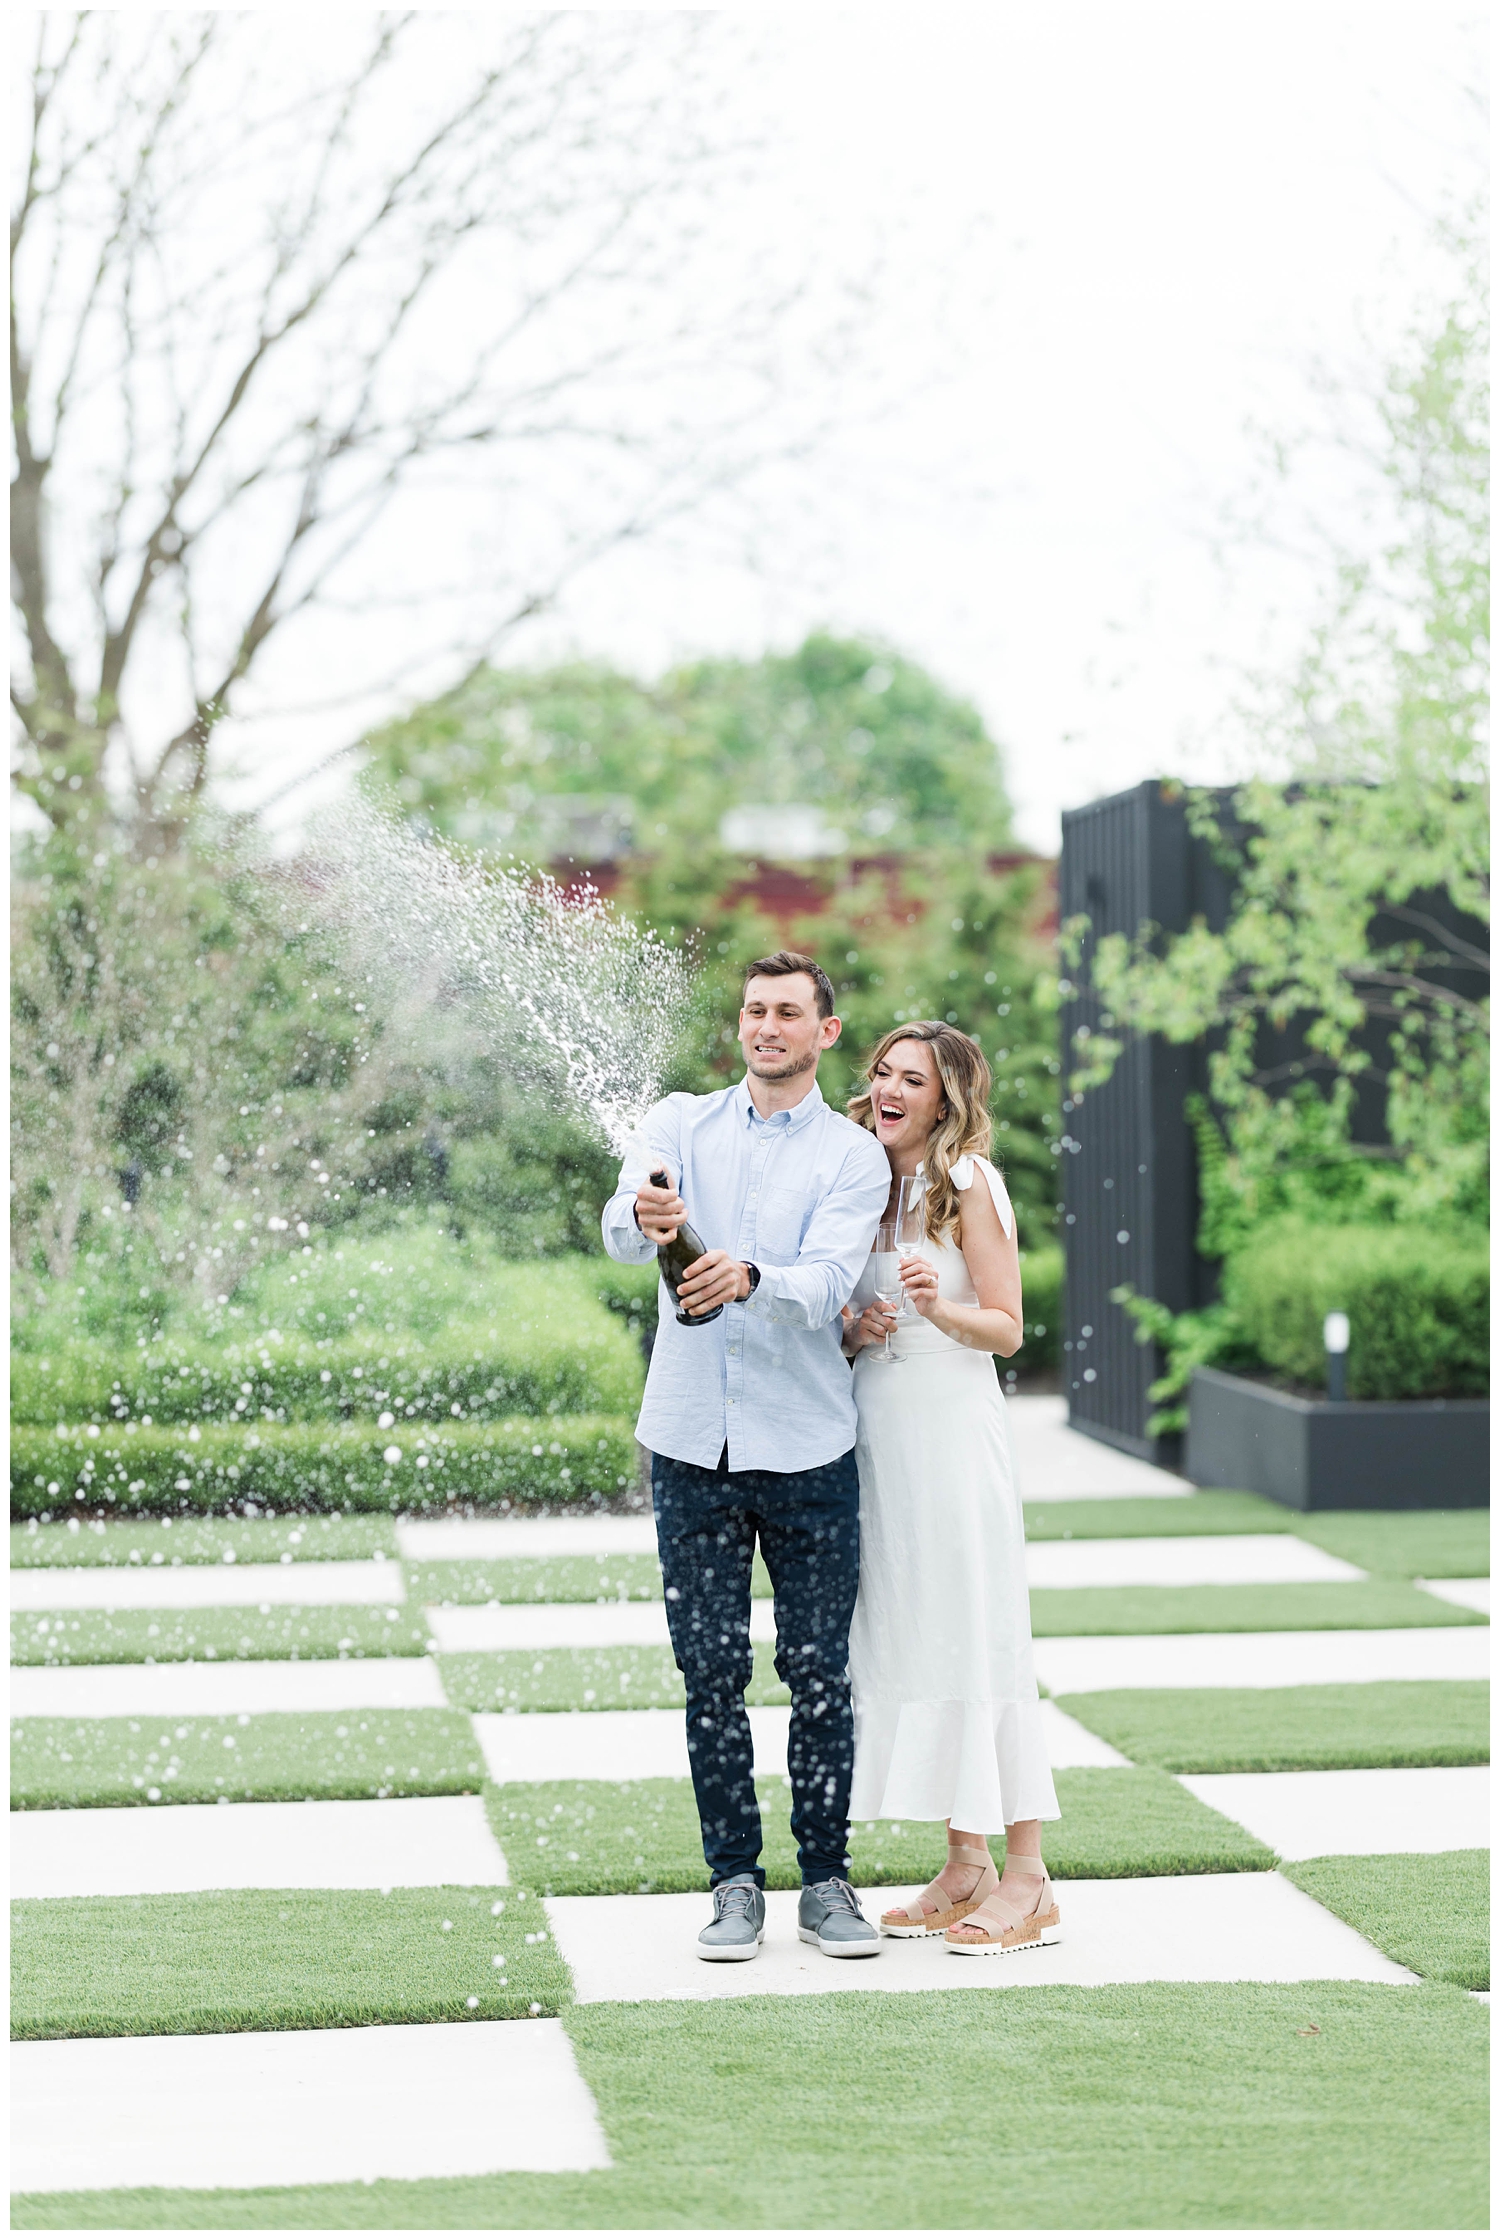 popping champagne at engagement session